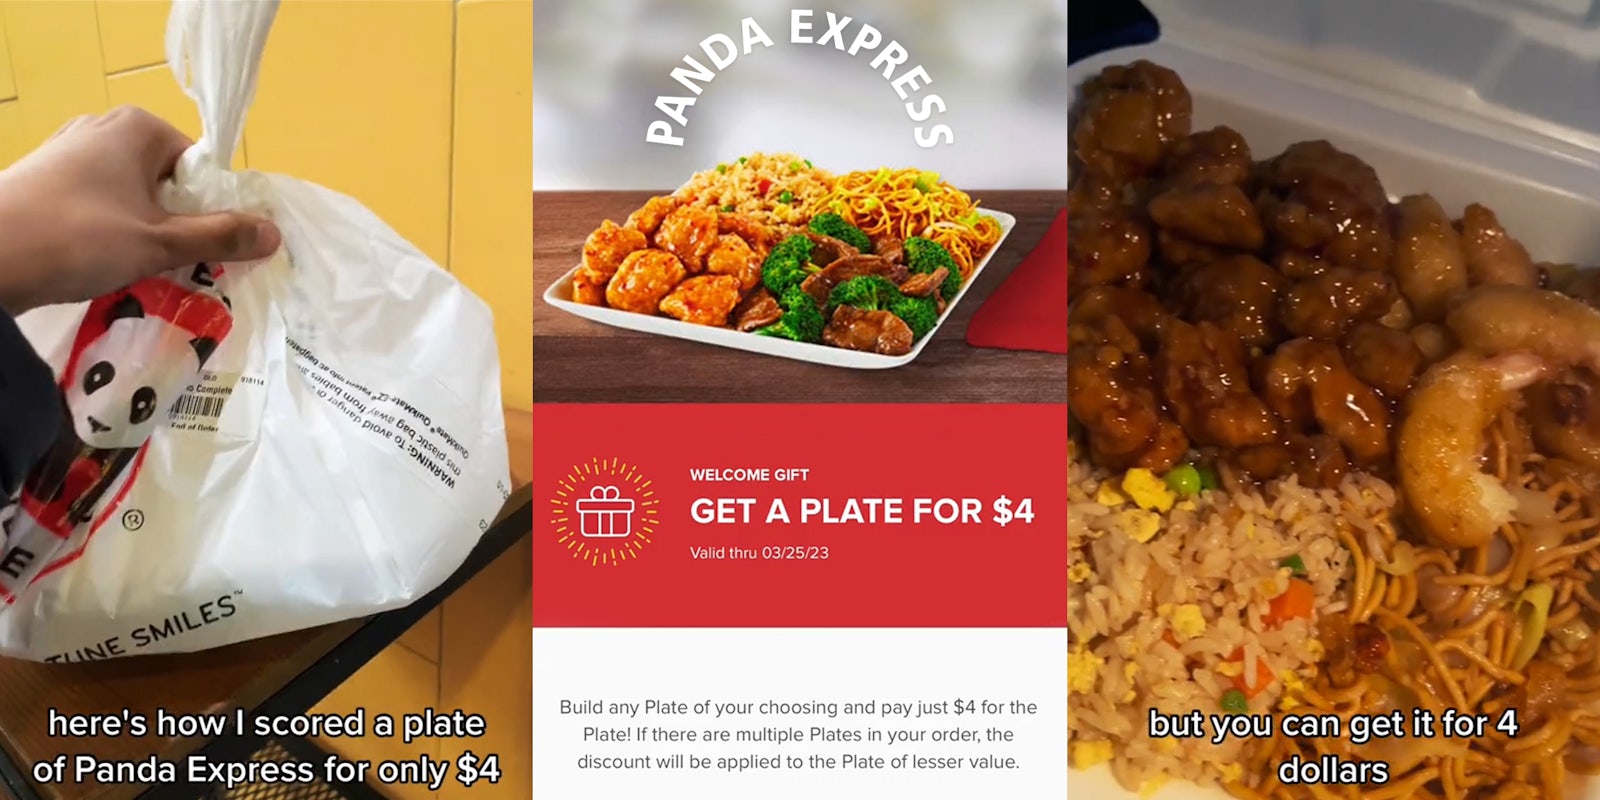 person holding Panda Express plastic bag with food inside with caption 'here's how I scored a plate of Panda Express for only $4' (l) Panda Express welcome gift in app if $4 plate with Panda Express logo at top (c) Panda express food in container with caption 'but you can get it for 4 dollars' (r)